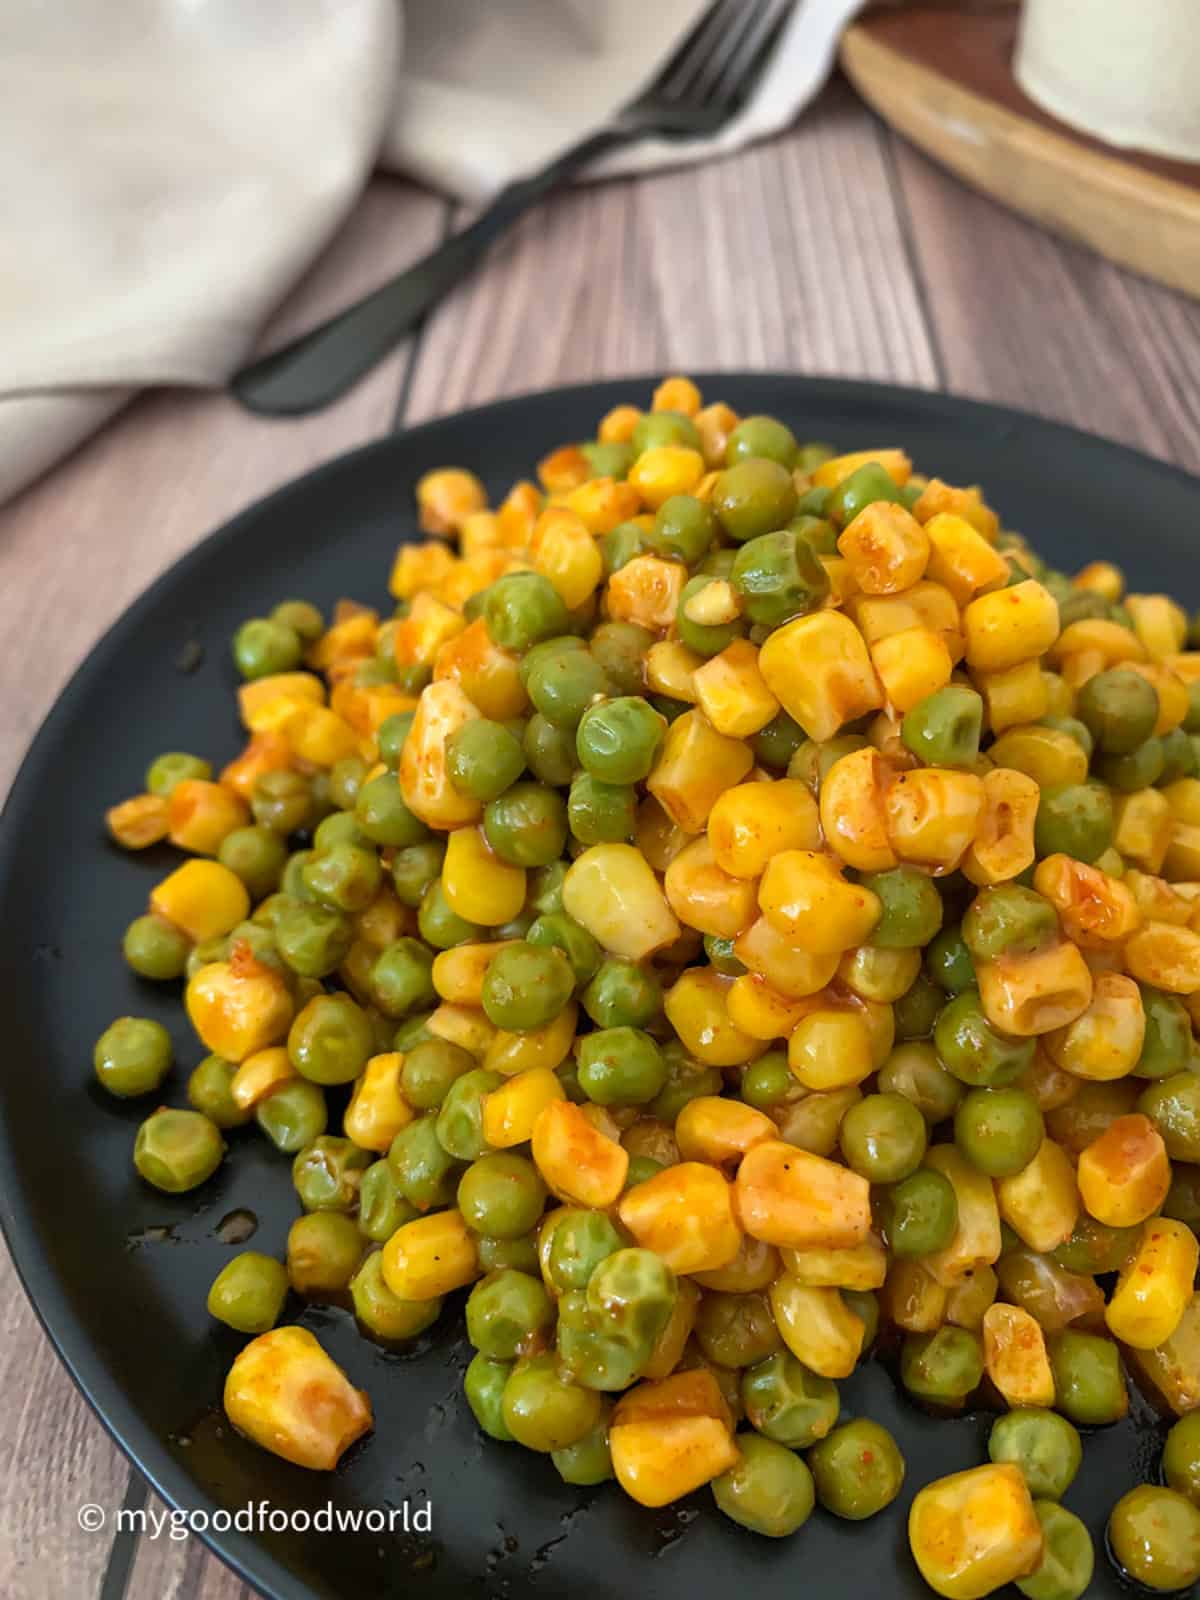 Juicy corn and peas salad is placed in a heap on a black plate.